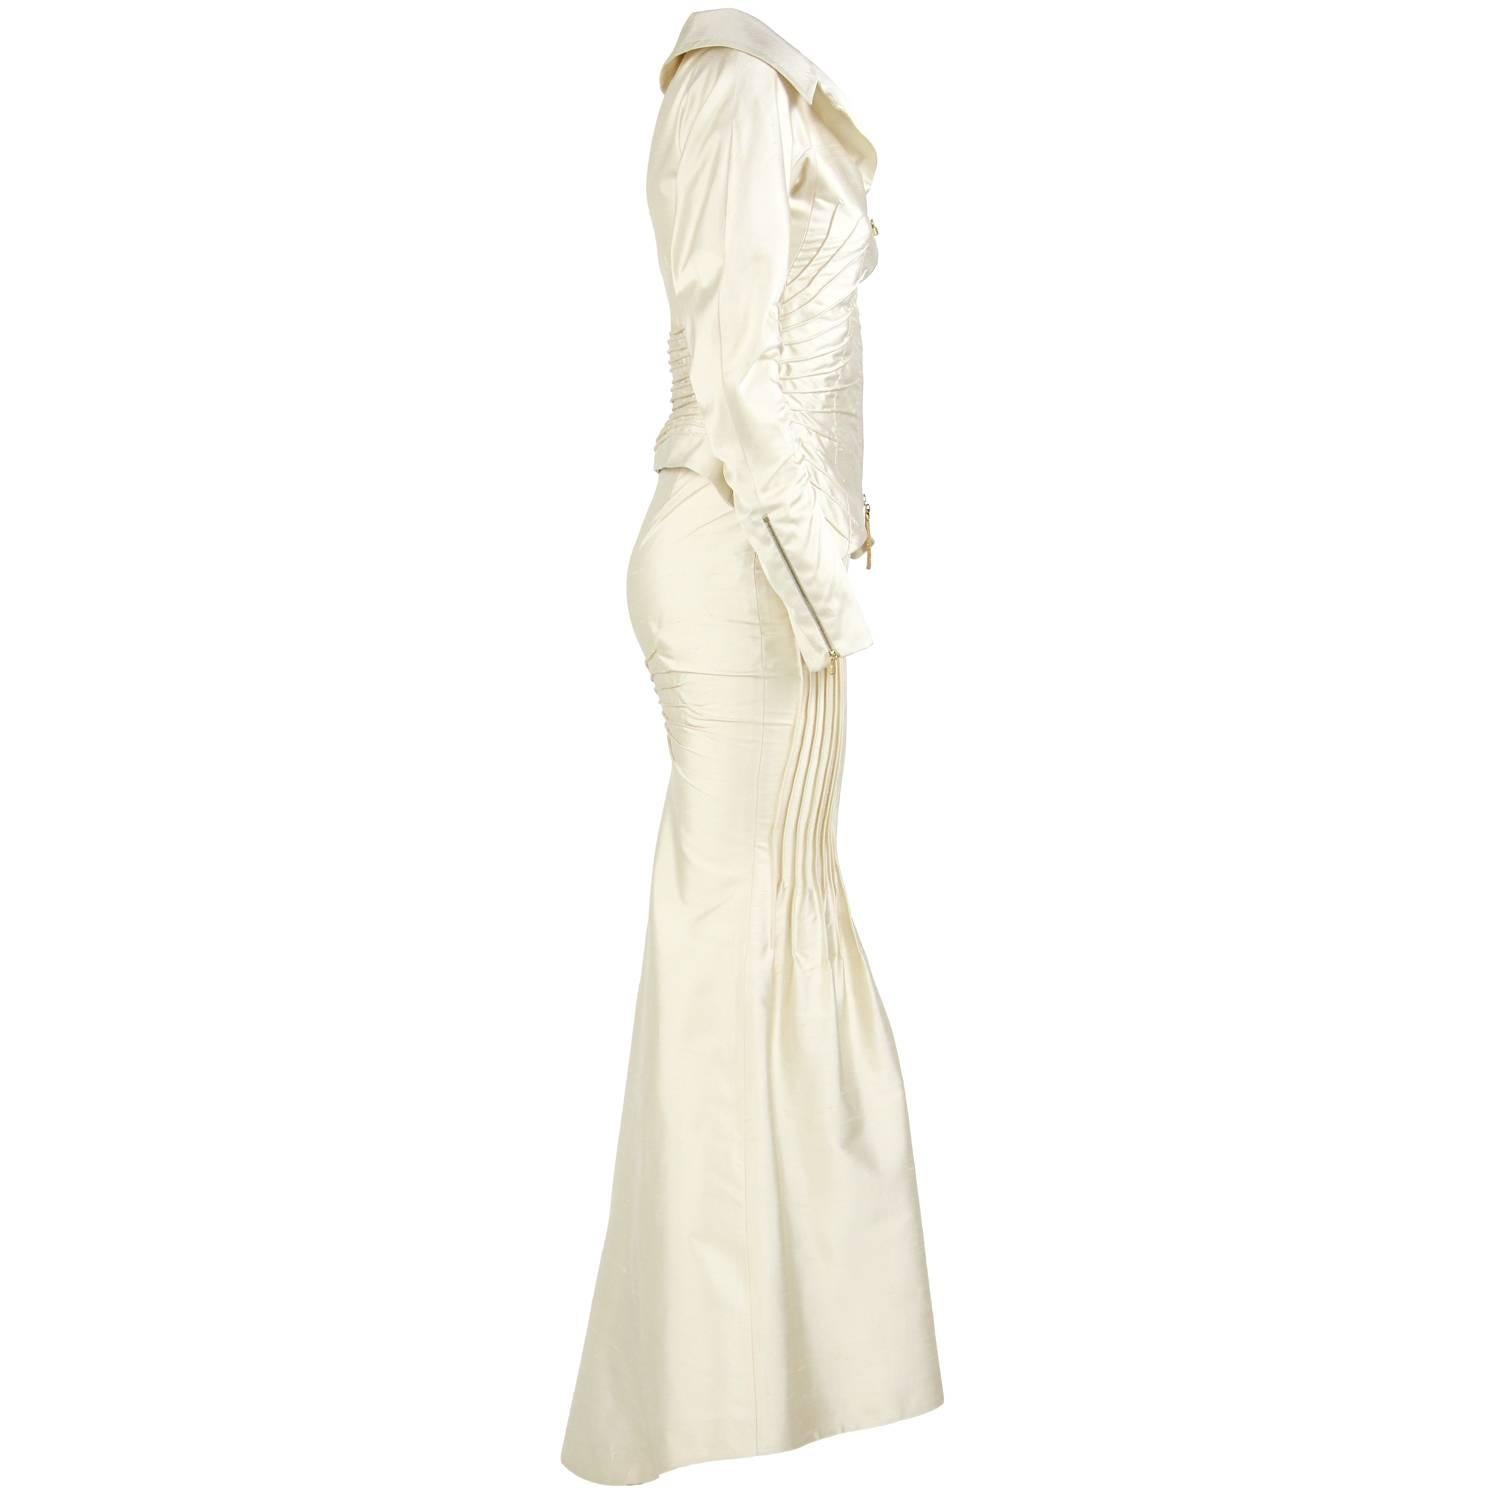 Marvellous two-piece vintage wedding suit by Gianfranco Ferré, in ivory silk 100%. It features a crop jacket with embossed tubular seams which create a decoration, repeated on the sleeves. Golden metal zip on the front and the cuffs. The splendid